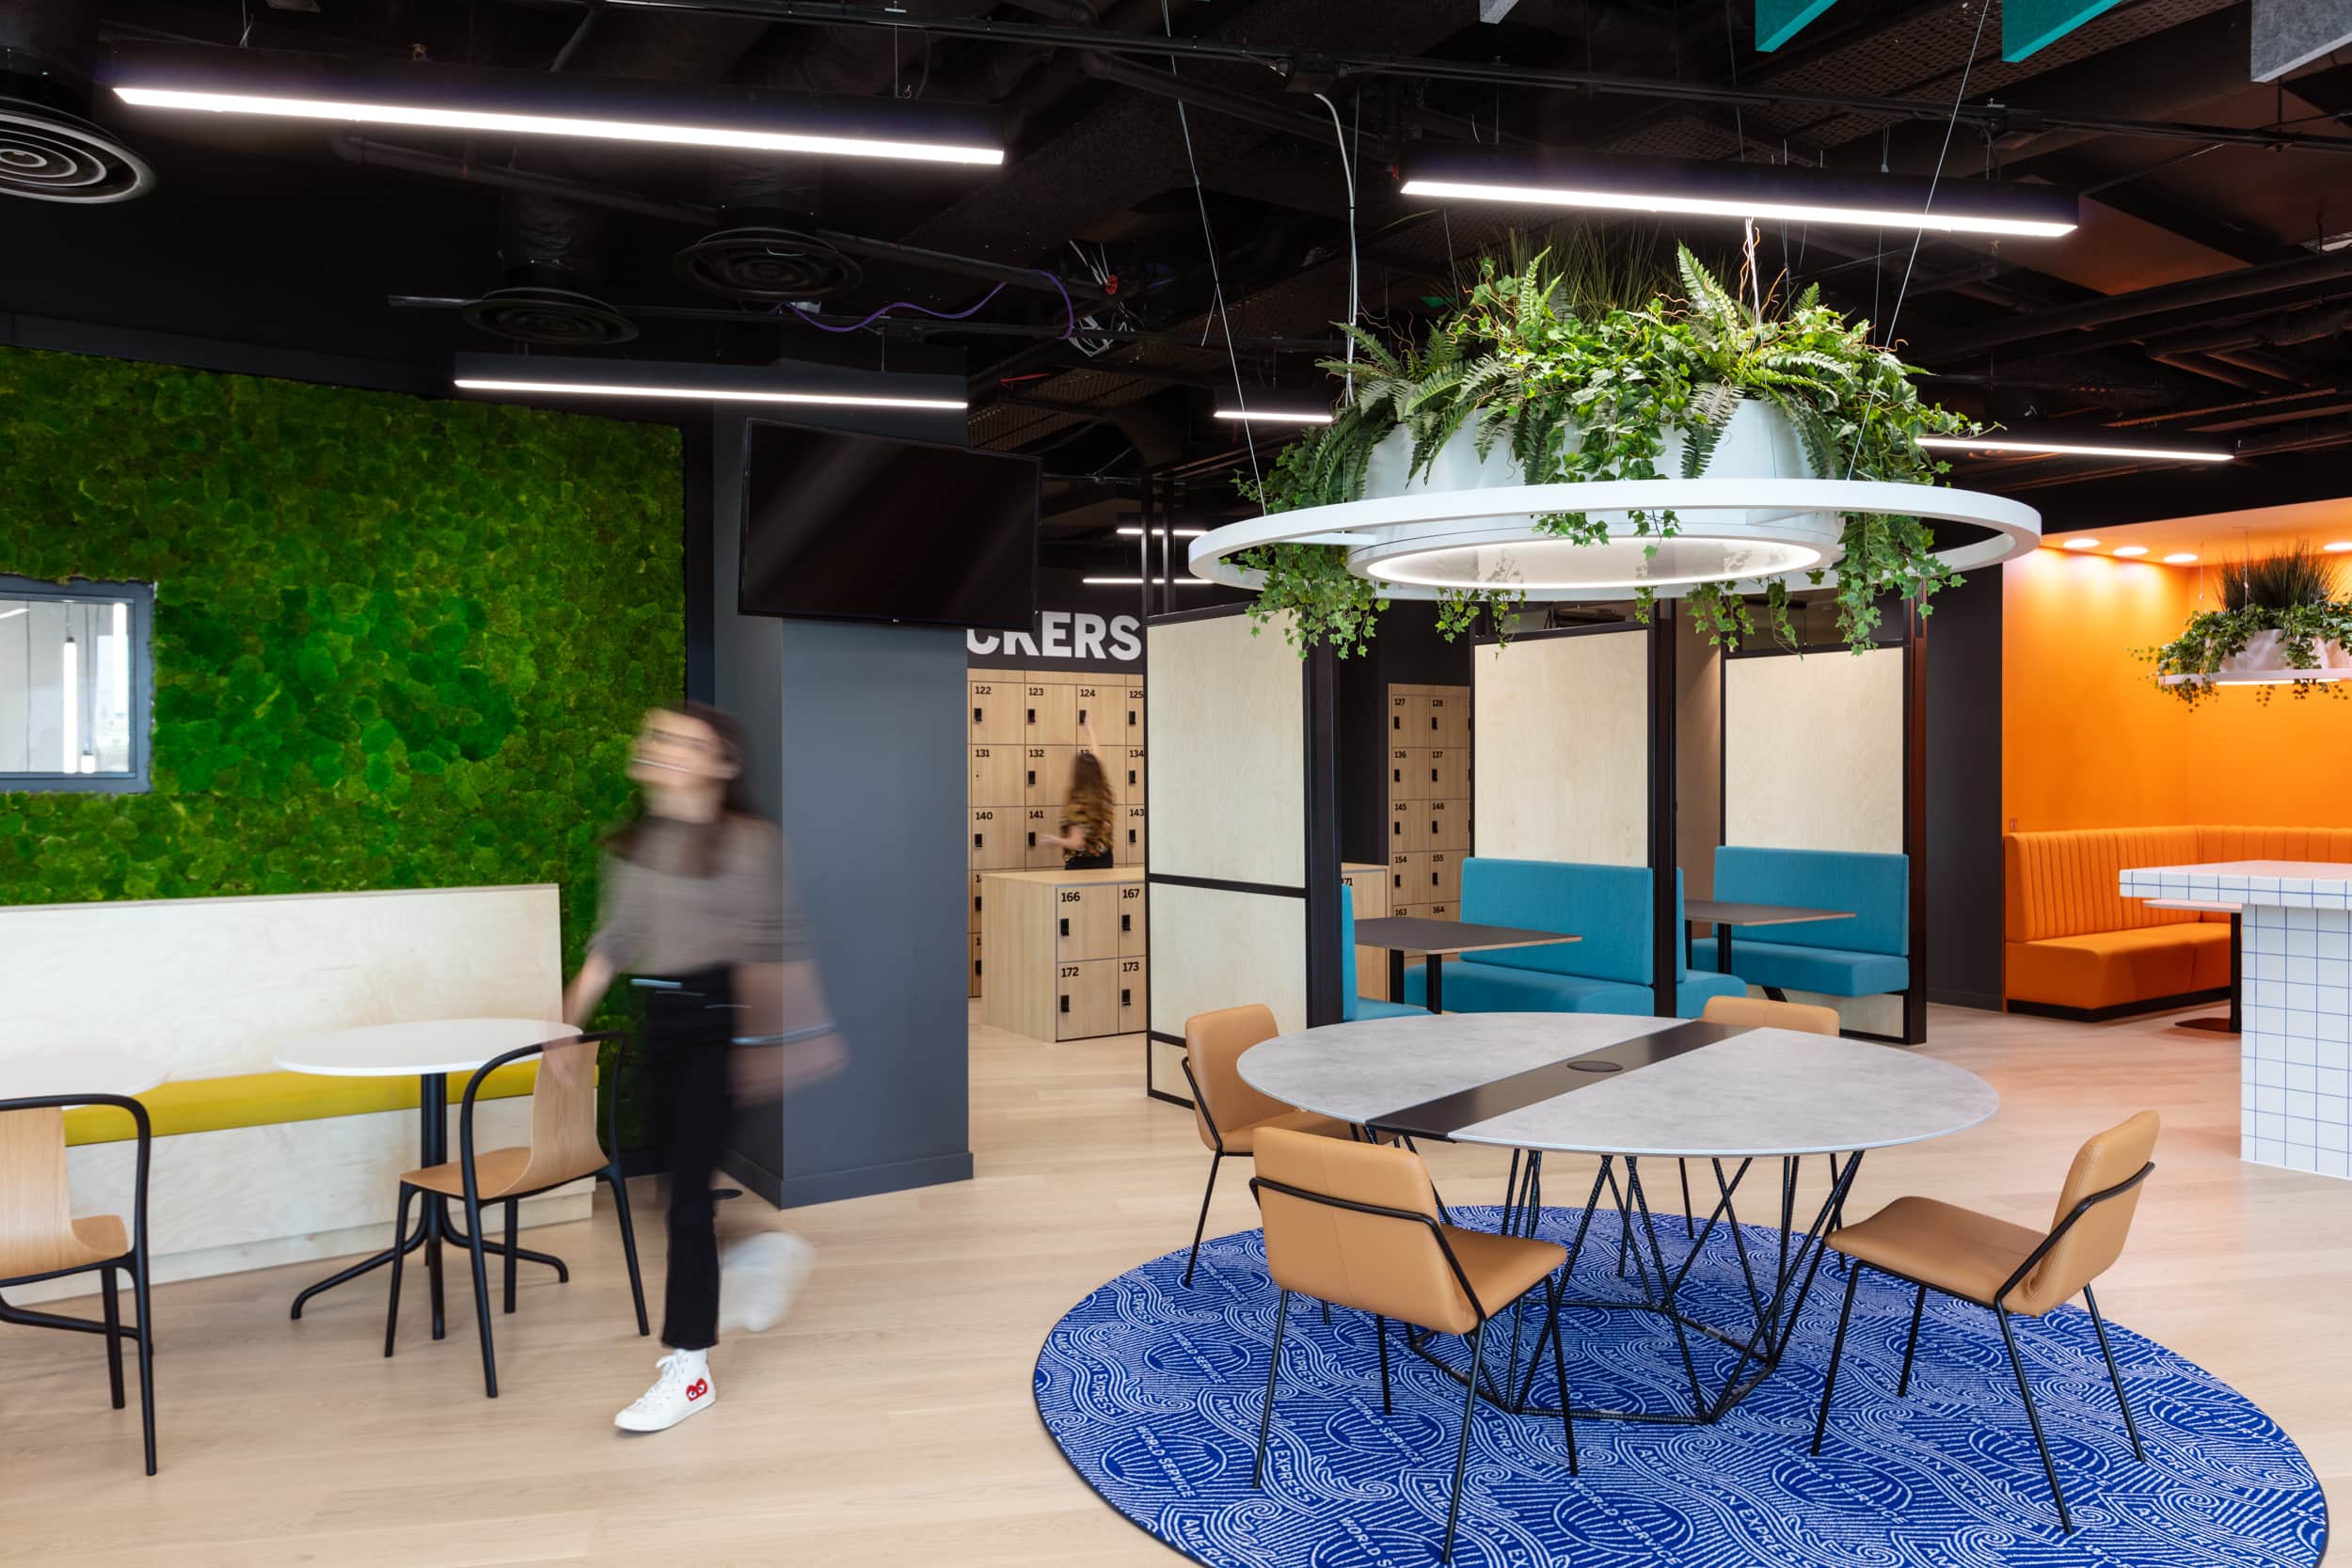 Inside the staff canteen area where a moss wall and a feature planter hang above a collection of dining chairs and tables.